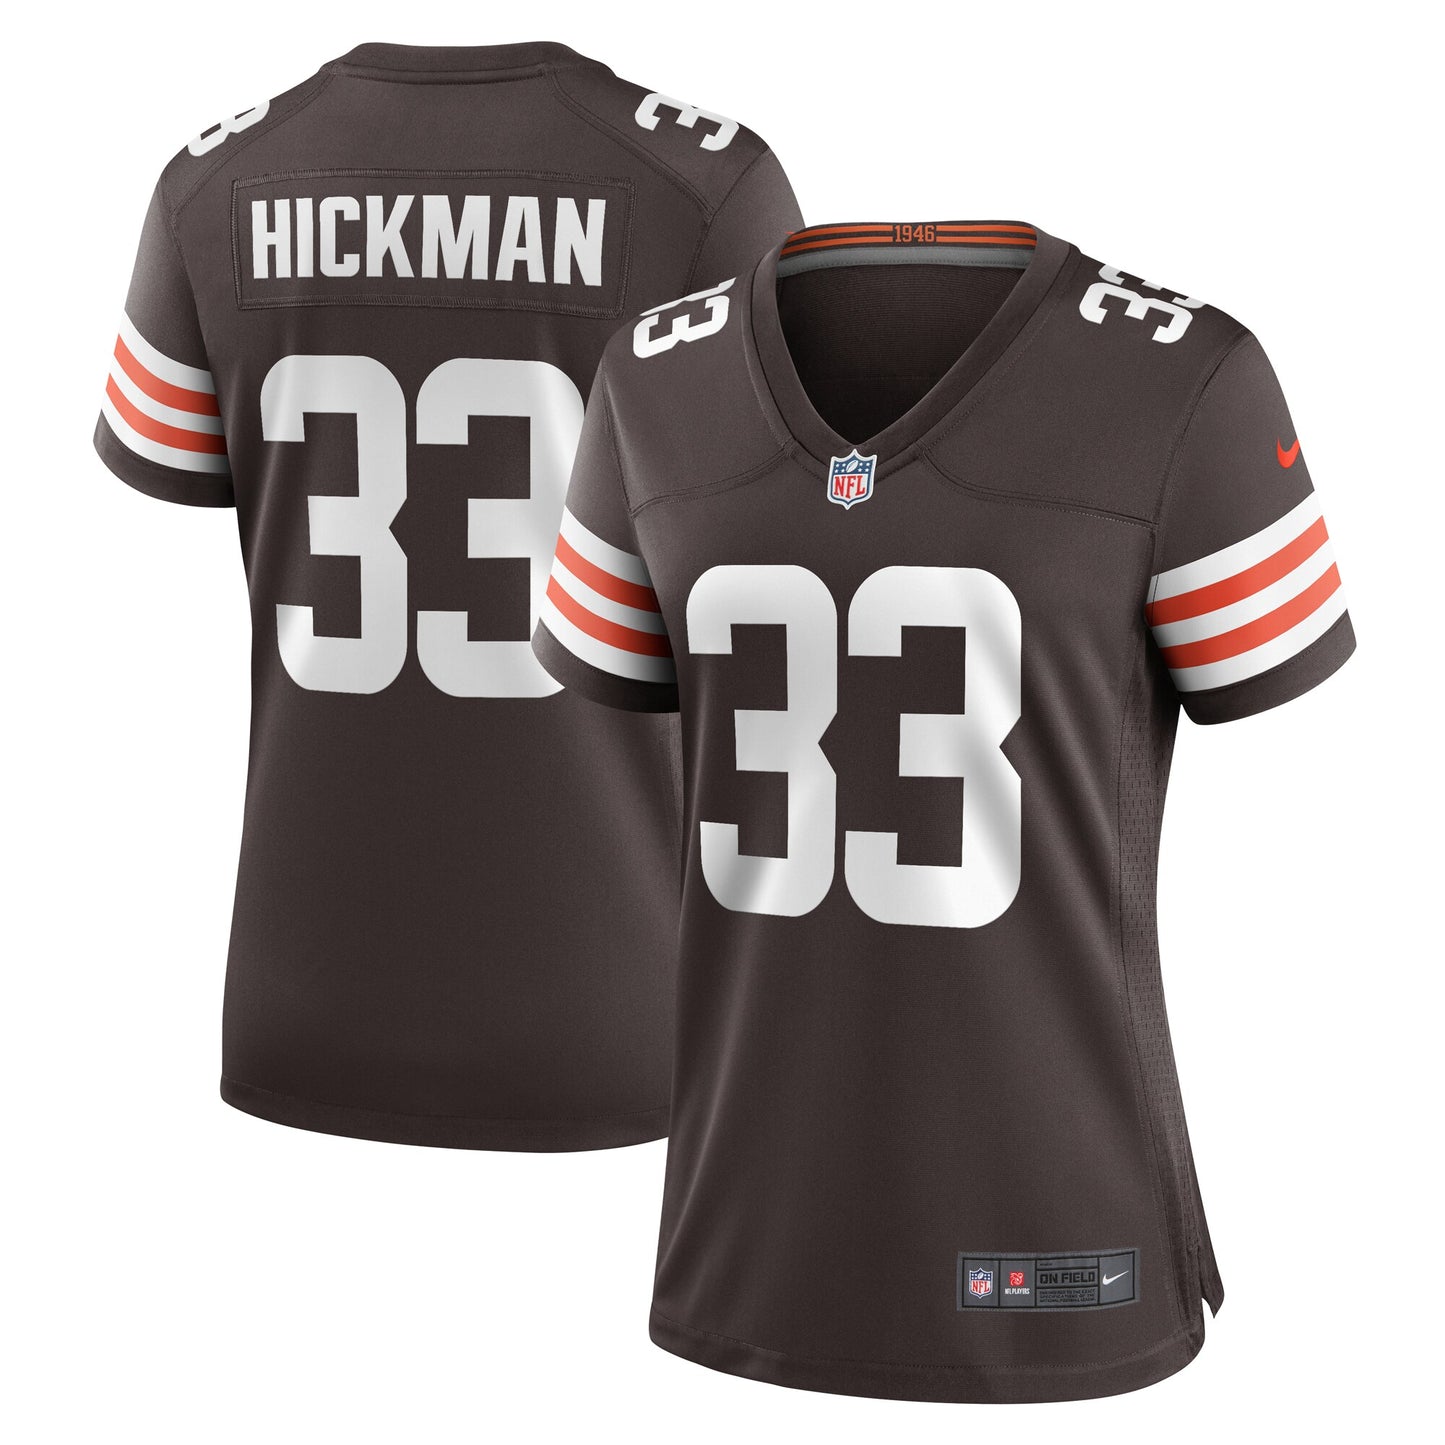 Ronnie Hickman Cleveland Browns Nike Women's Team Game Jersey - Brown